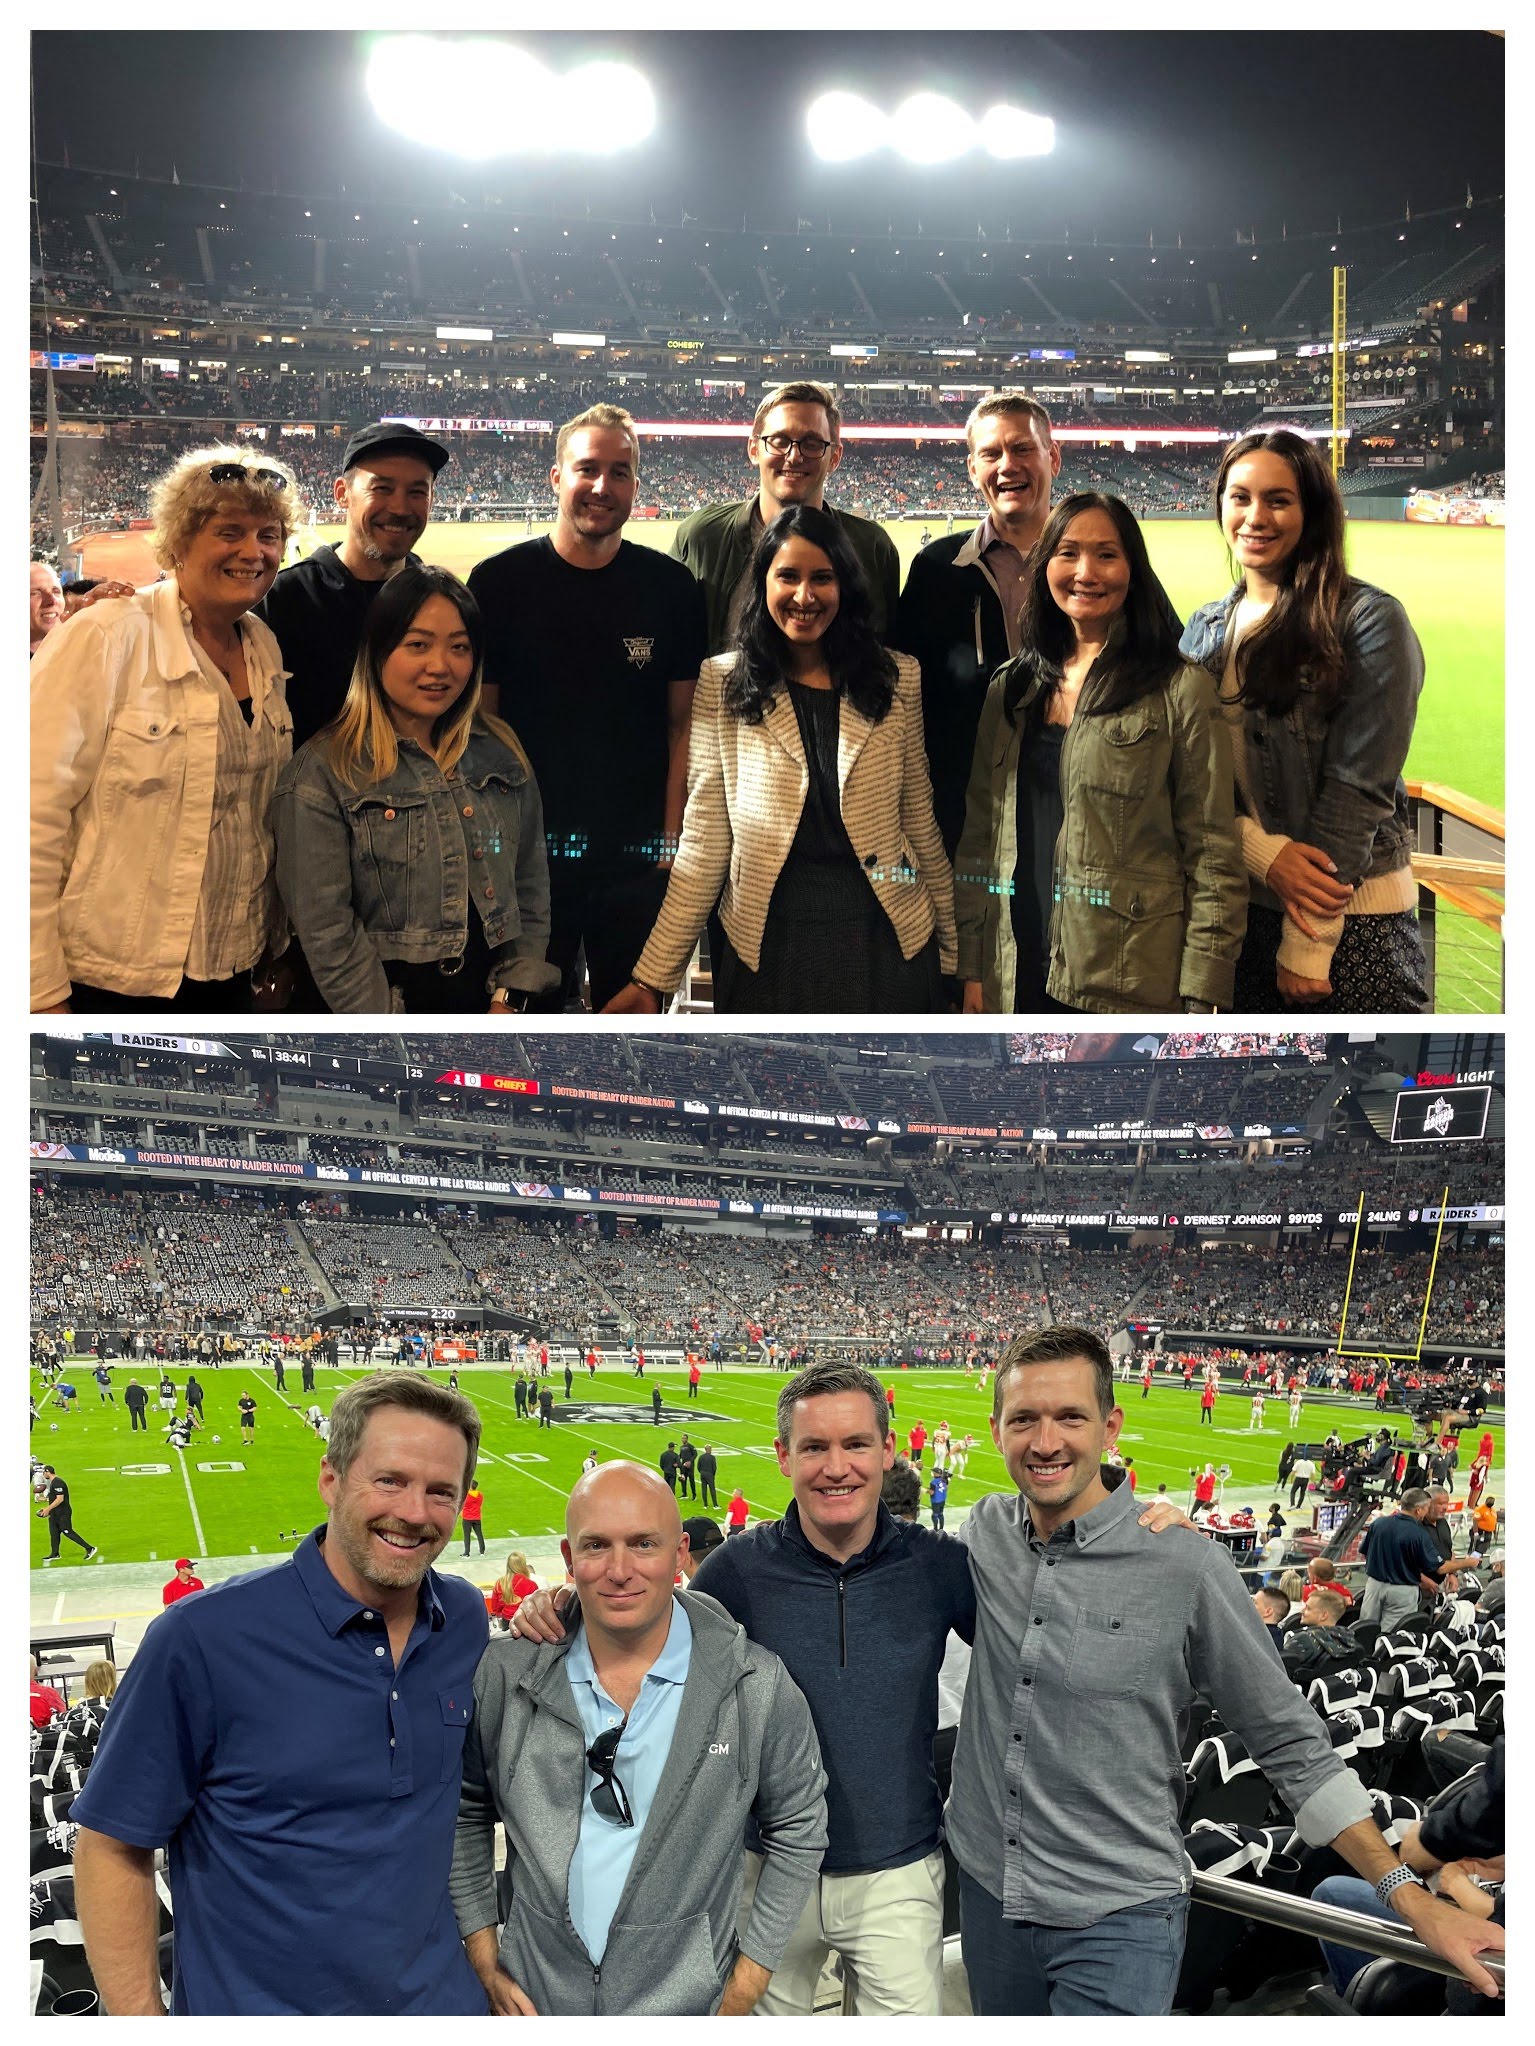 Hosting Clients and Media Partners at a SF Giants game and BetMGM at a Raiders game in Las Vegas